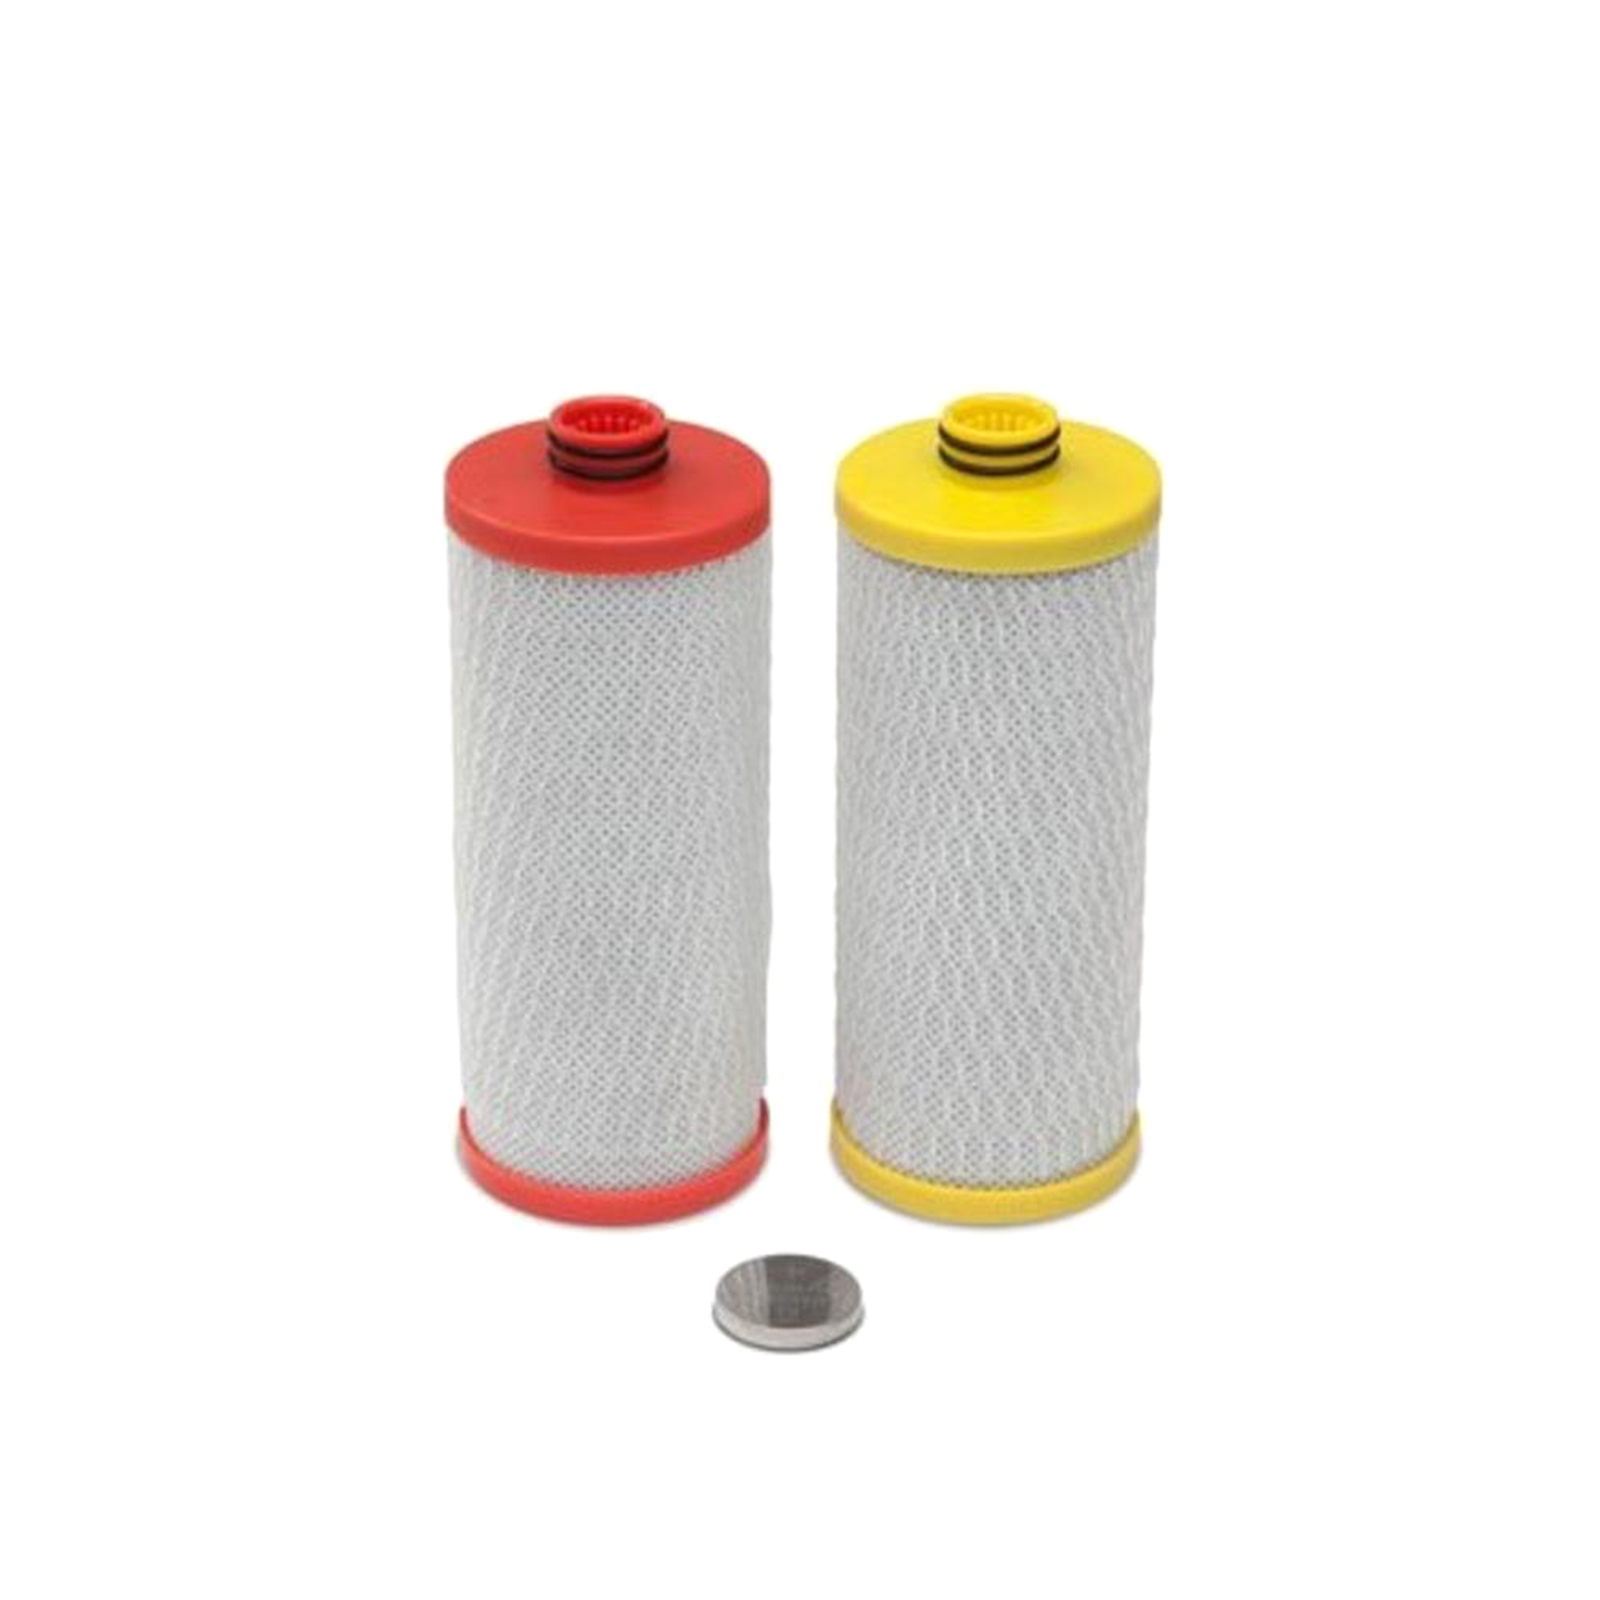 Aquasana AQ-5200R Set of 2 Replacement Filter Cartridges for Under Sink Water Filtration System